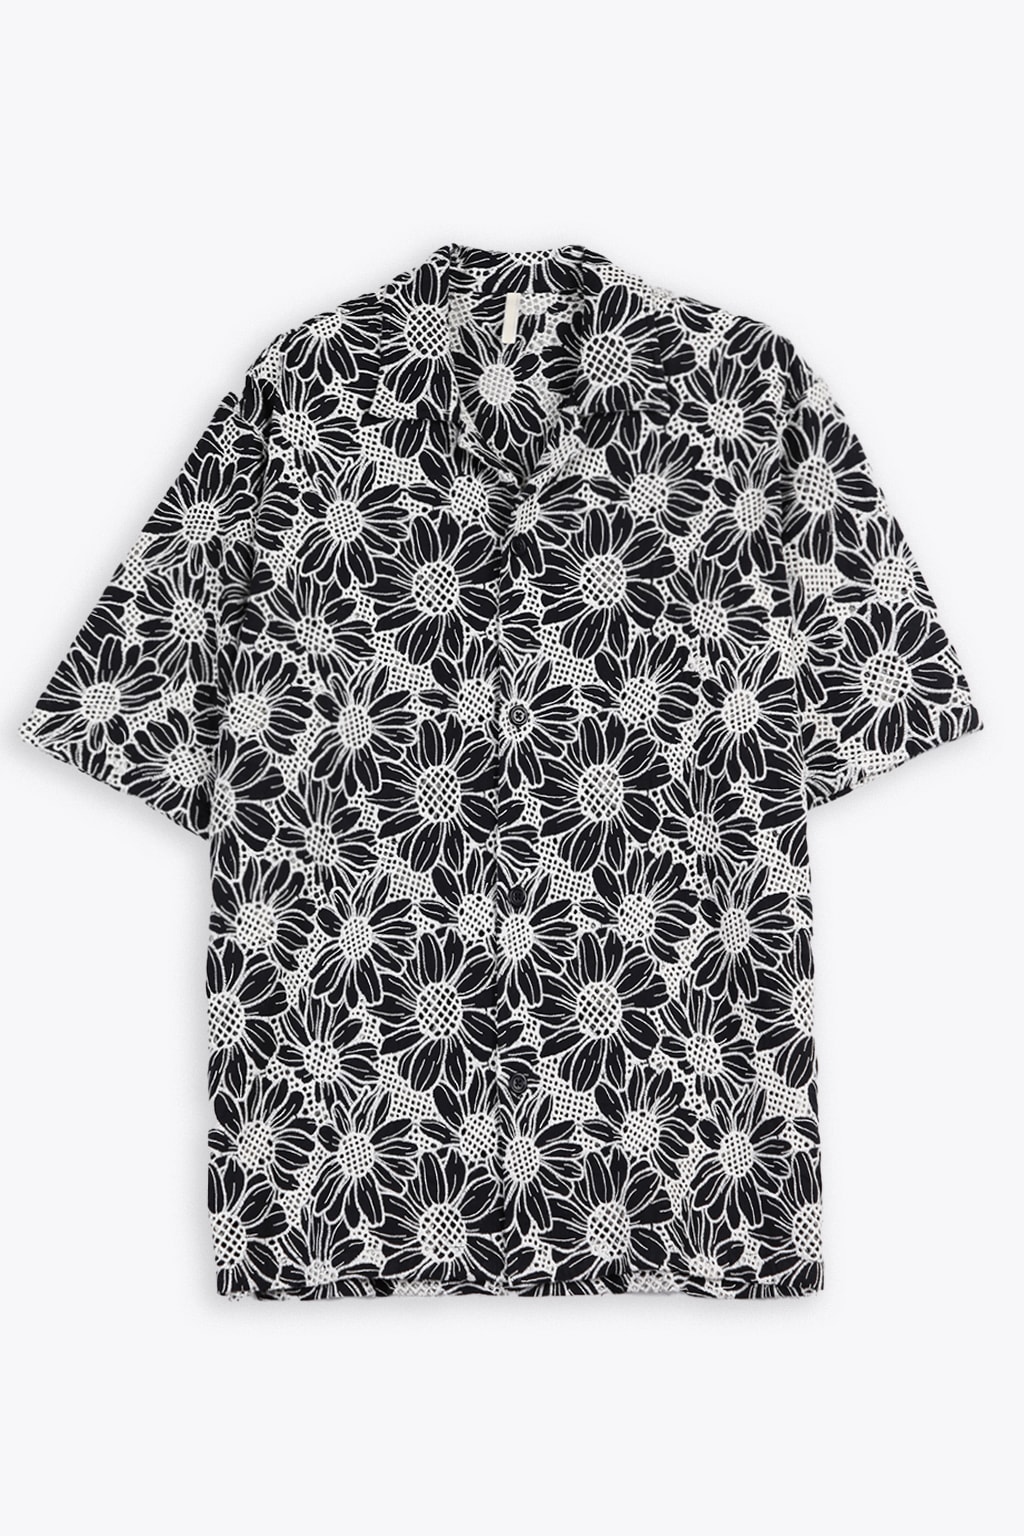 SUNFLOWER CAYO SS SHIRT BLACK SHIRT WITH FLORAL EMBROIDERY PATTERN - CAYO